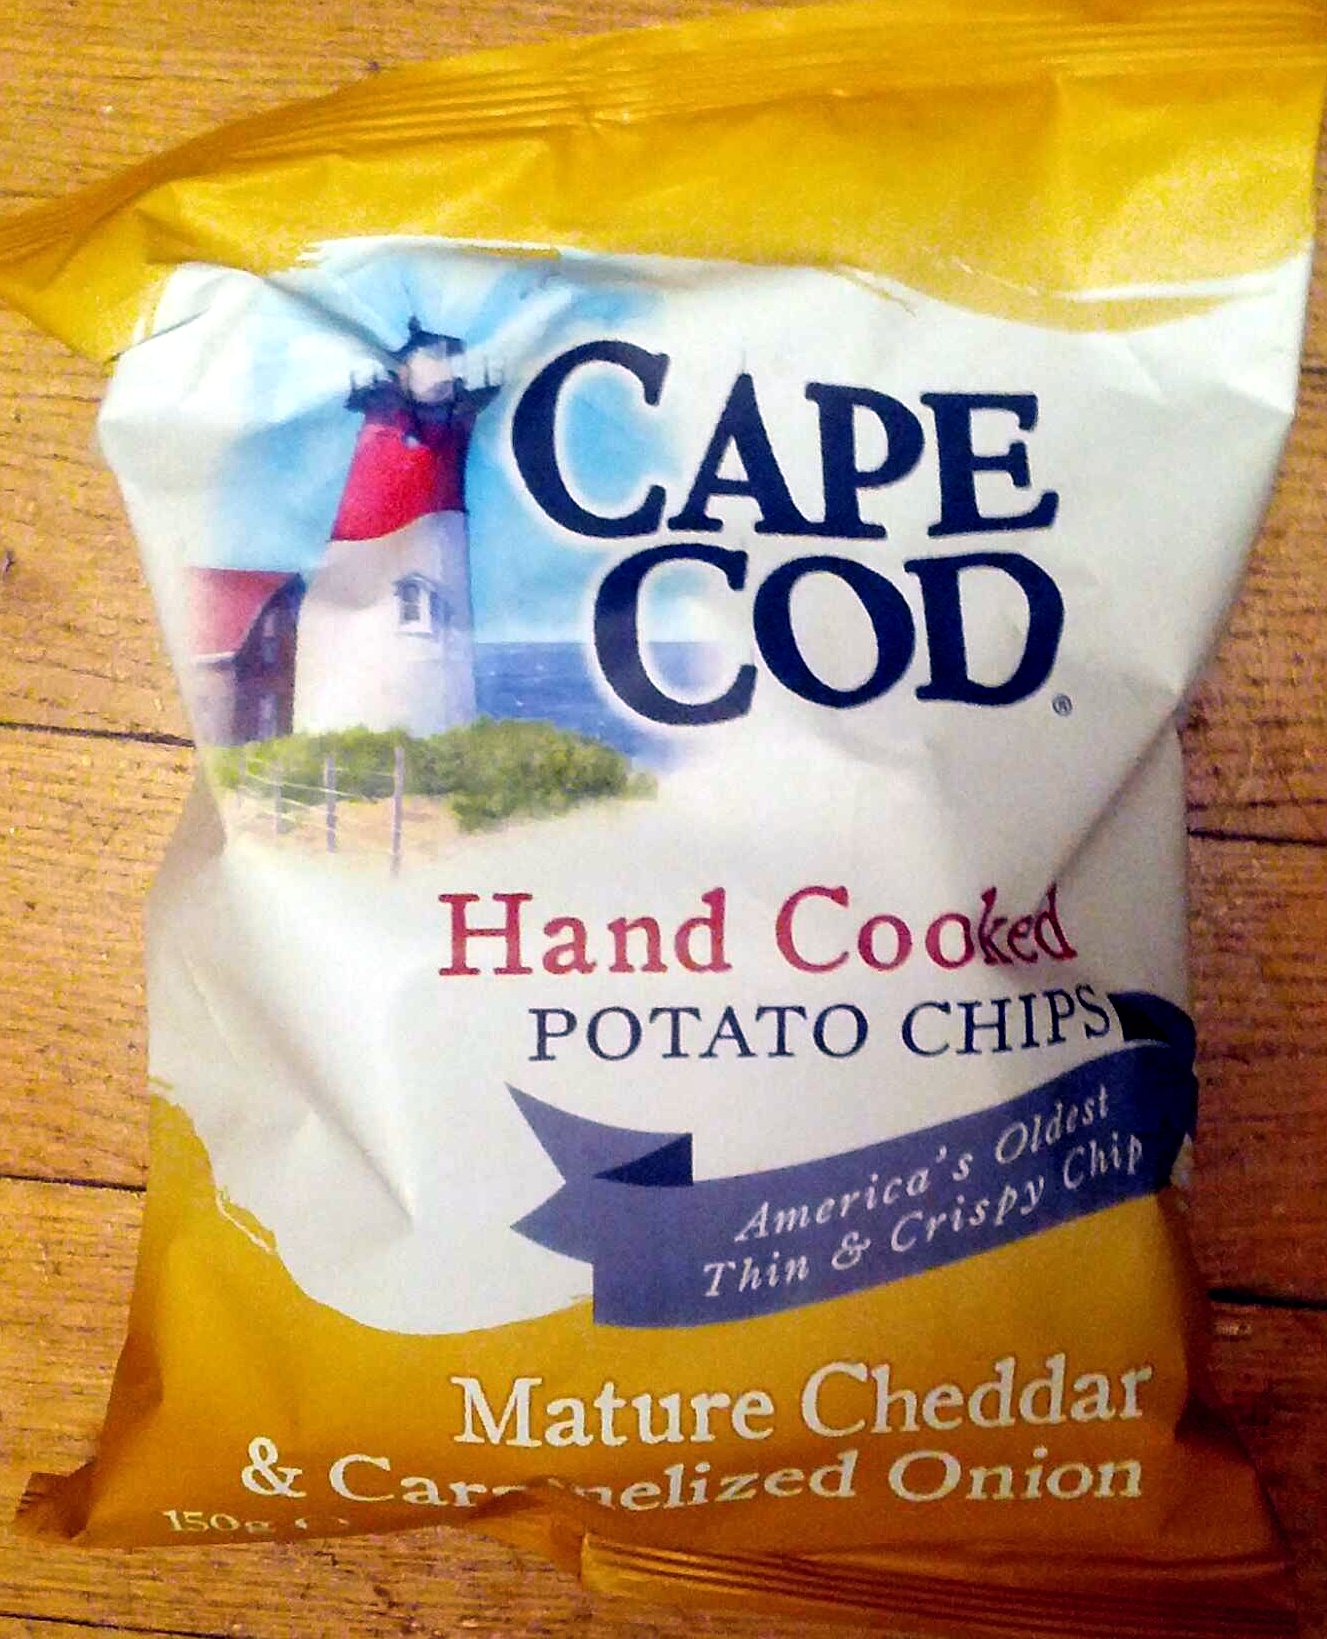 Hand Cooked Potato Chips Mature Cheddar & Caramelized Onion - Produit